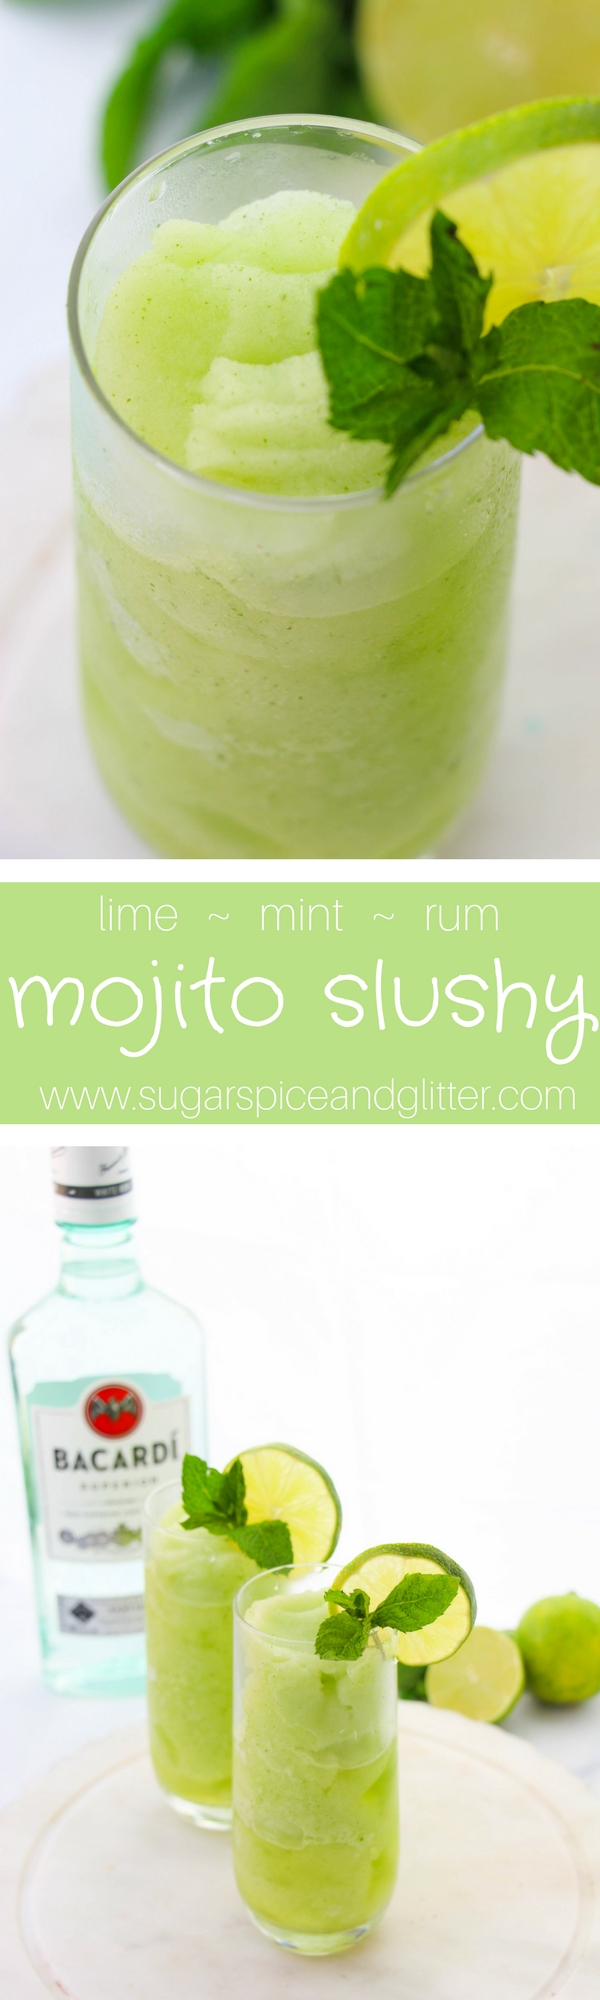 Mojito Slushies, a refreshing lime mint rum cocktail recipe perfect for summer. A refreshing and bright slushy cocktail recipe